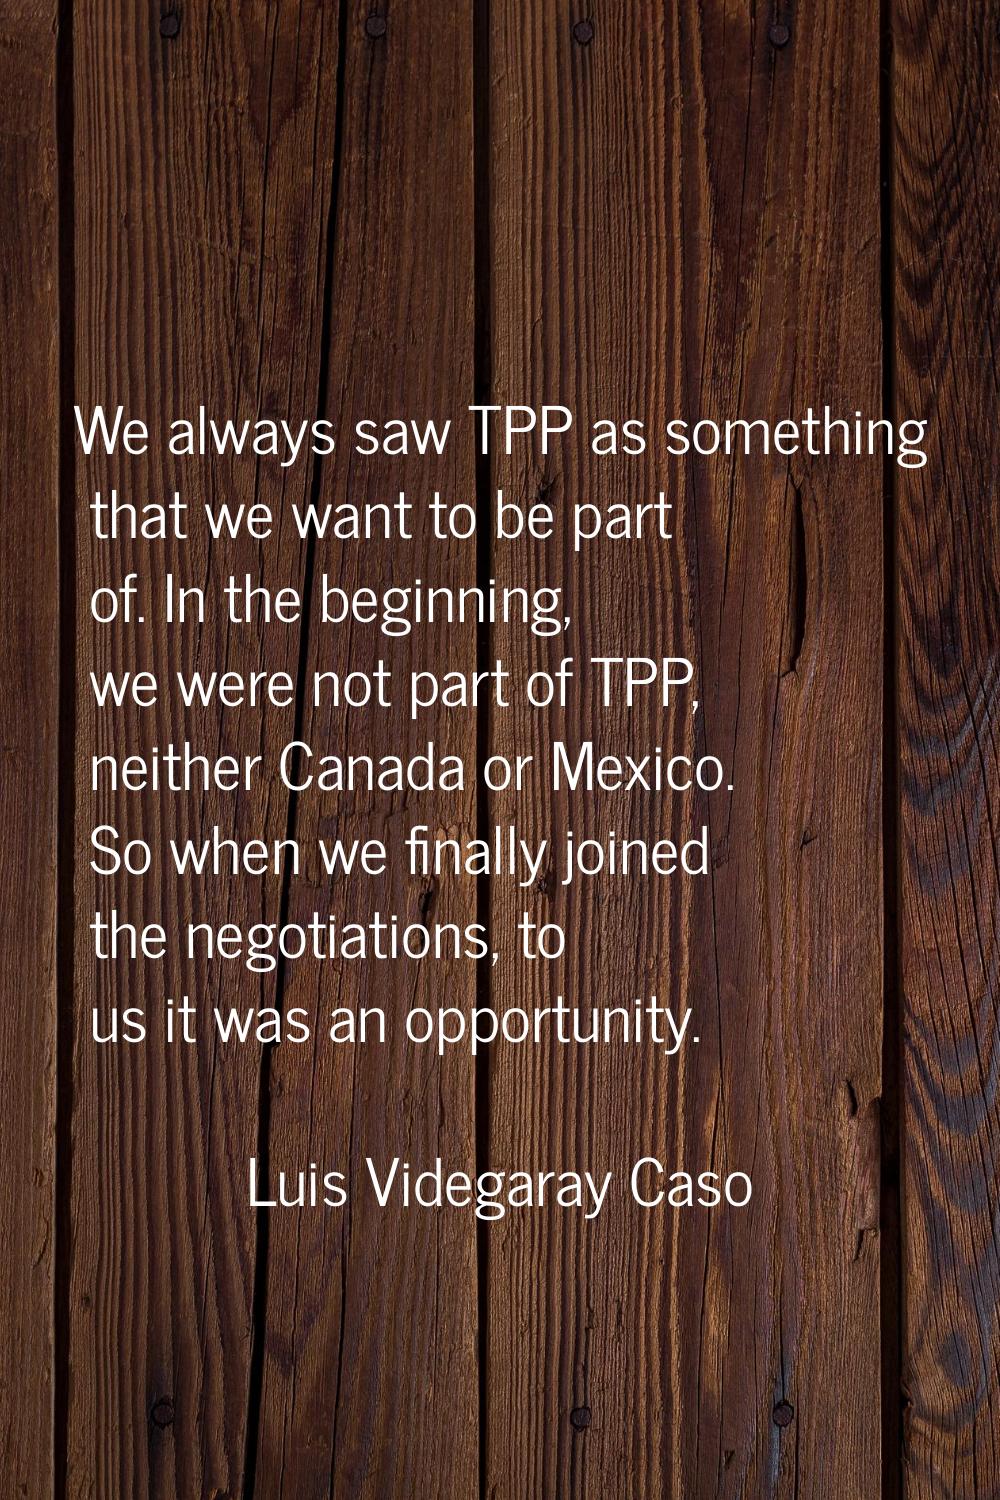 We always saw TPP as something that we want to be part of. In the beginning, we were not part of TP